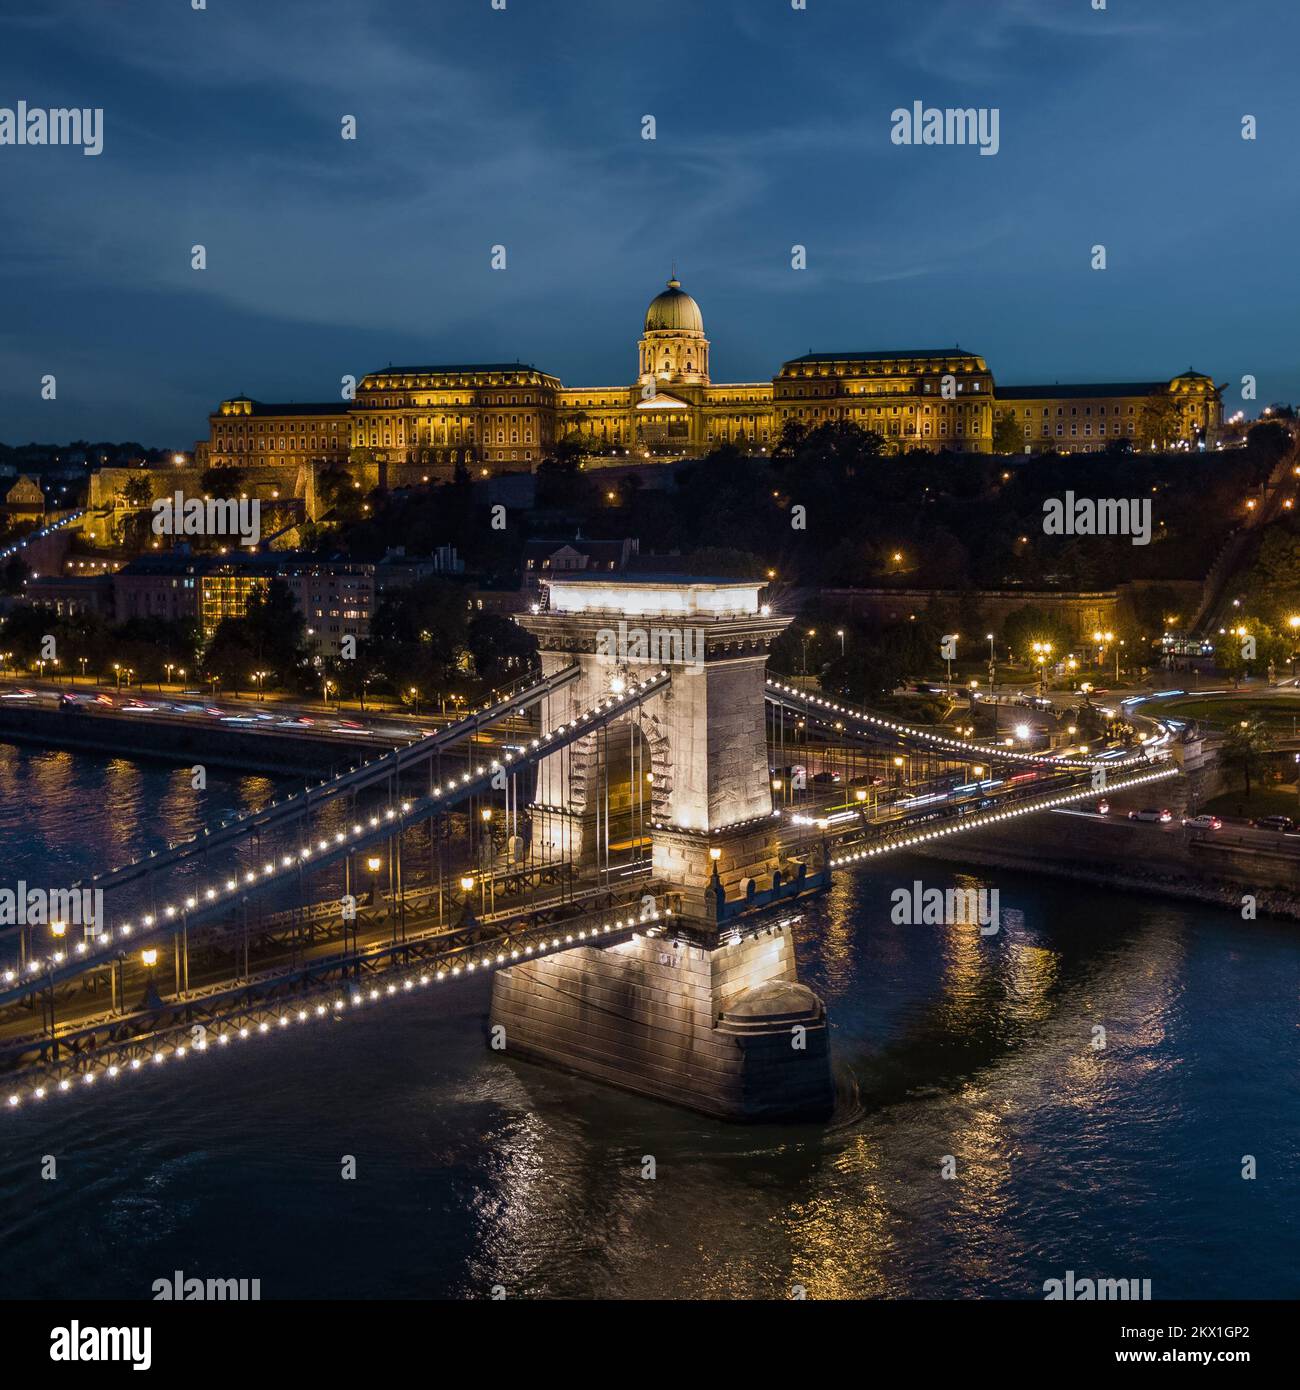 Aerial view of Buda Palace and Szechenyi Chain Bridge over the Danube river at dusk in Budapest, Hungary. Stock Photo